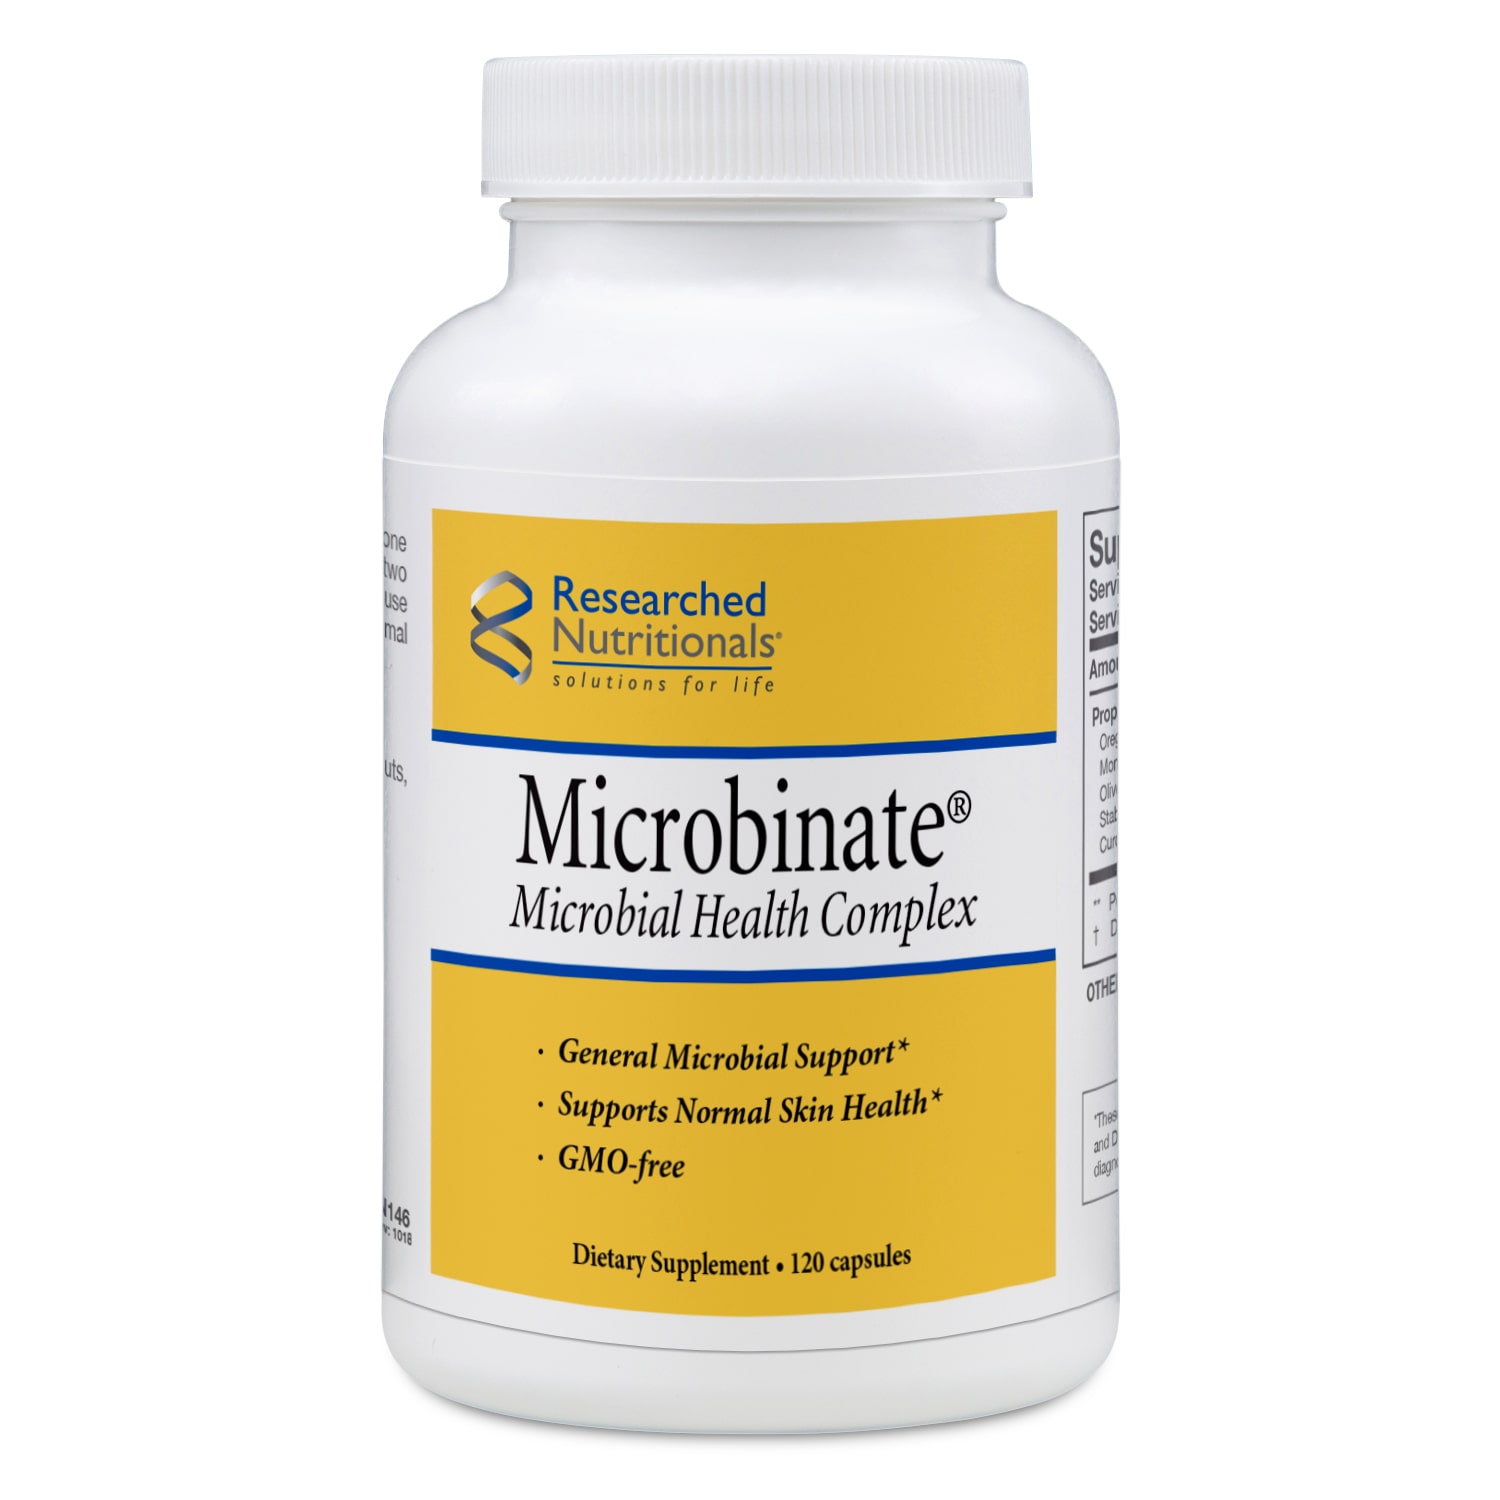 RESEARCHED NUTRITIONALS - Microbinate